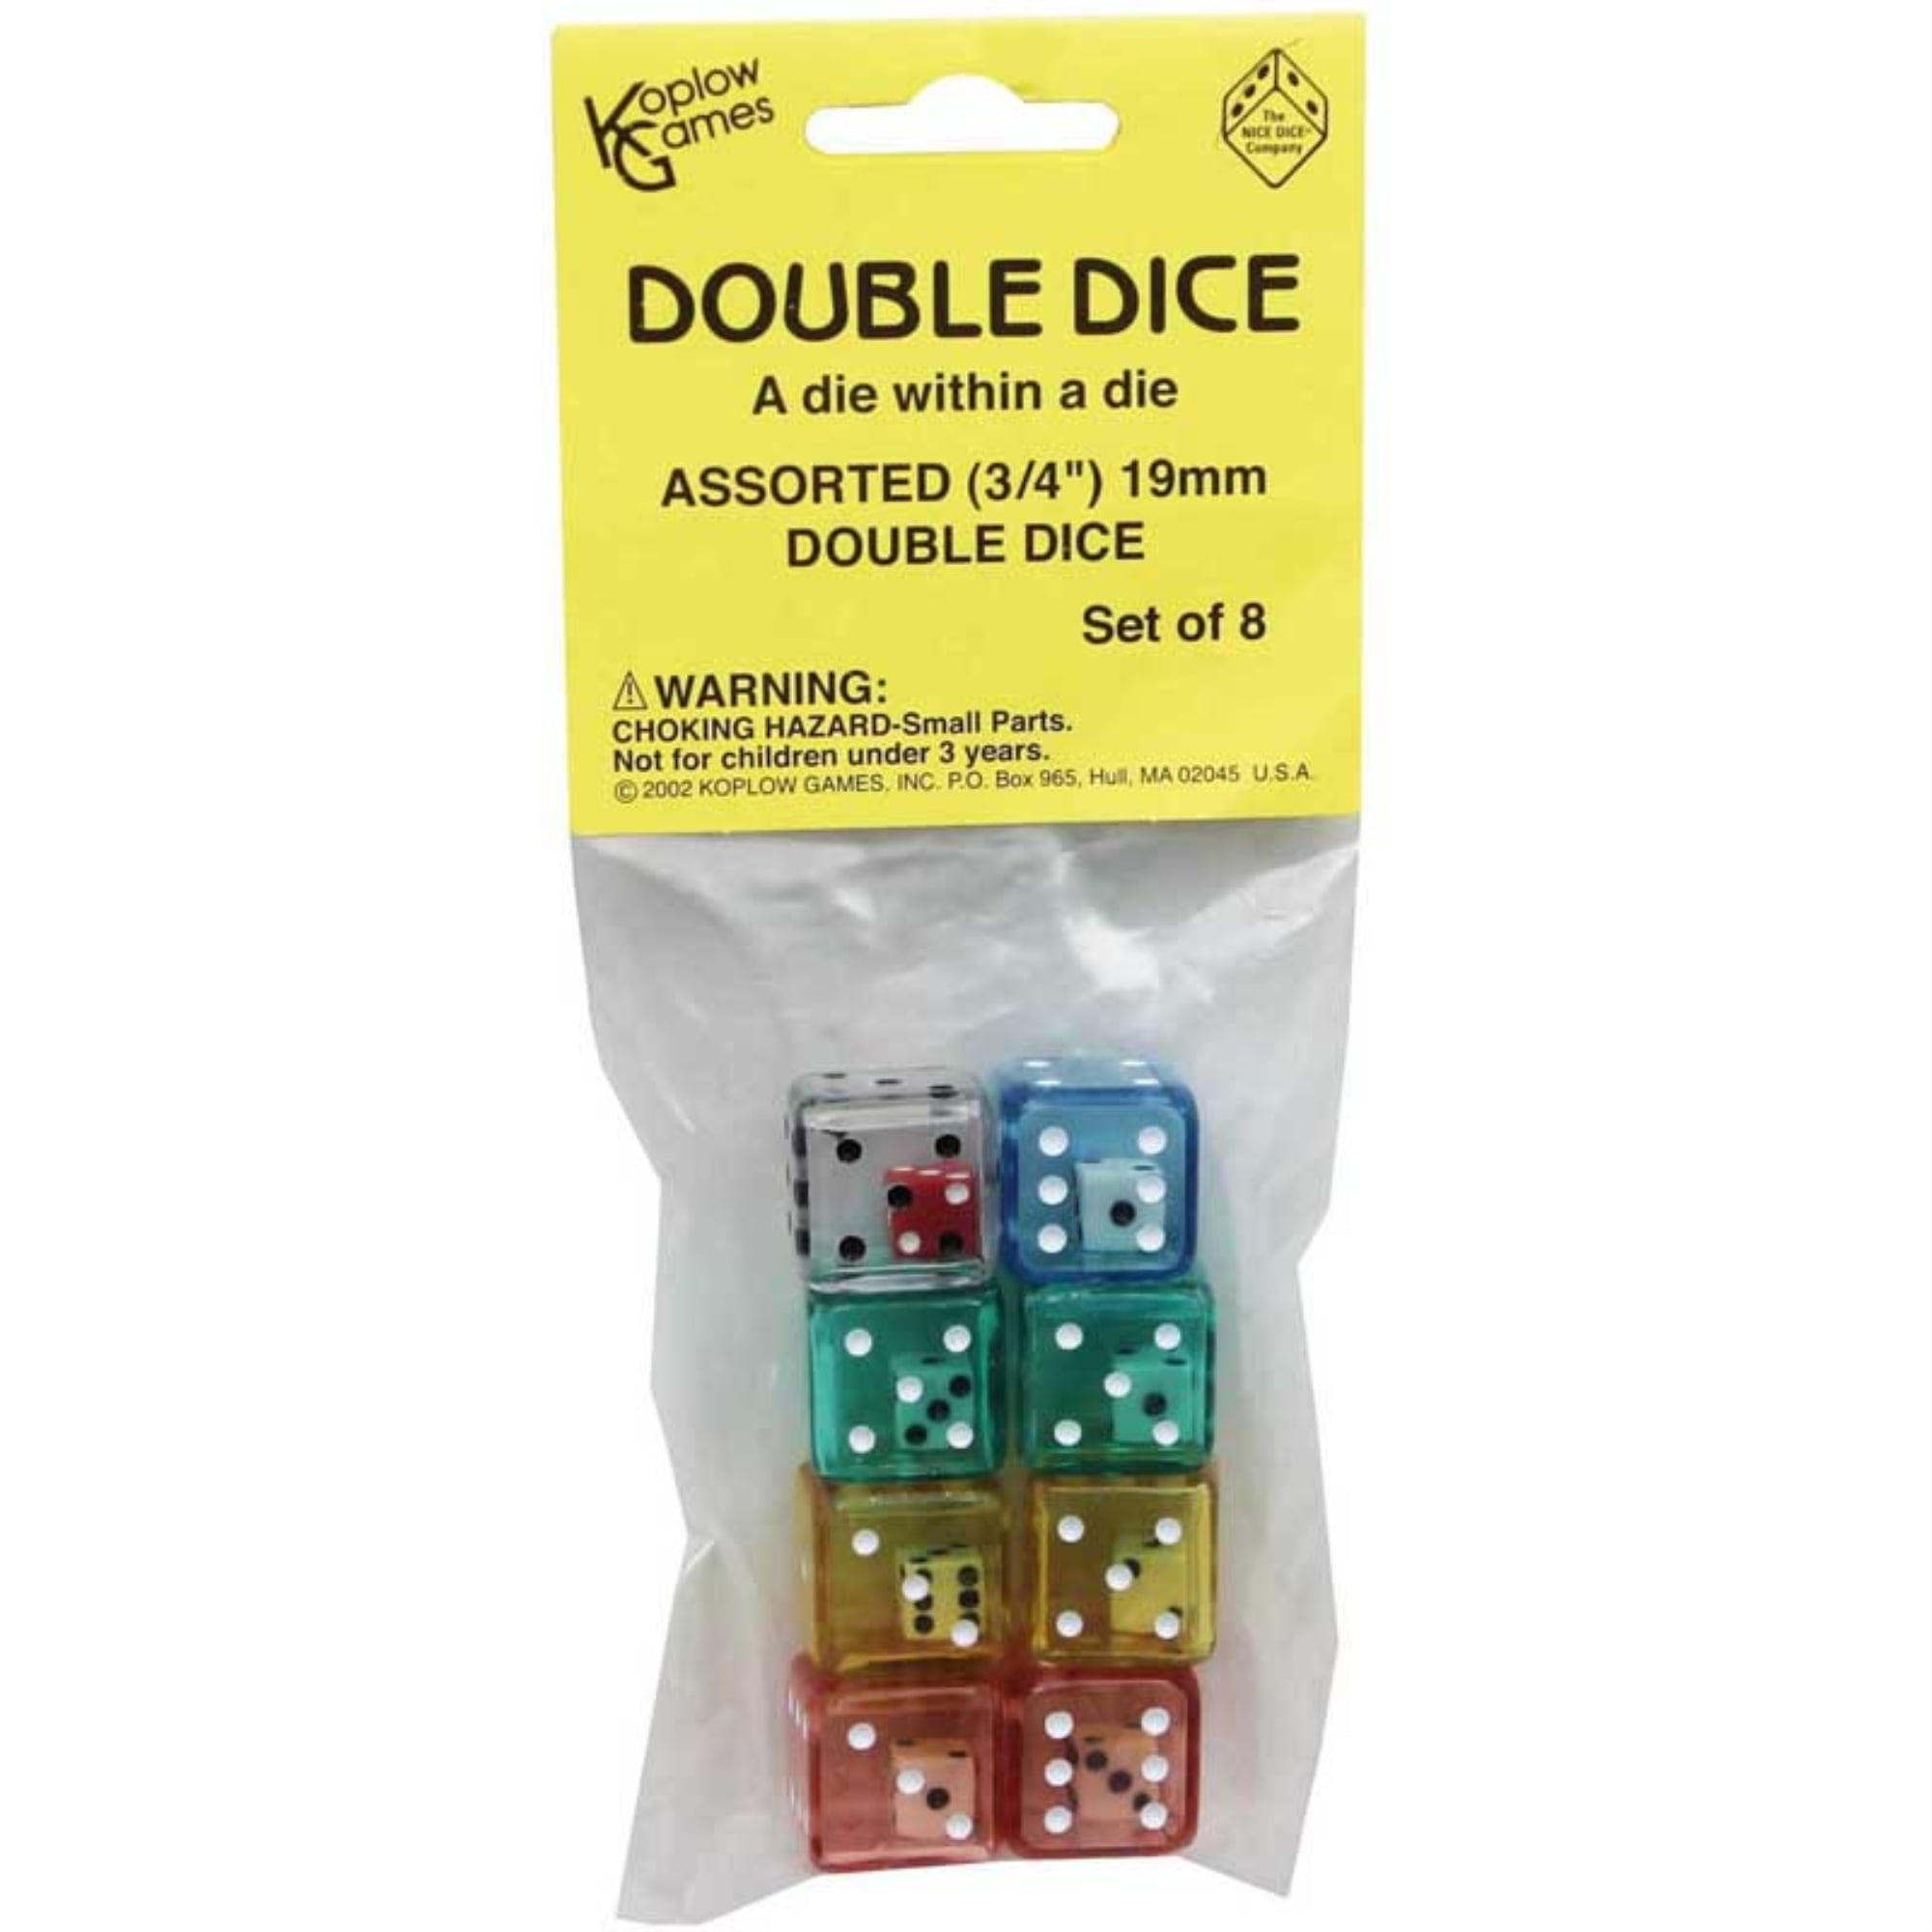 2-In-1 Dice Set of 6 D6 19mm Double Dice White Inside Translucent Yellow Die 